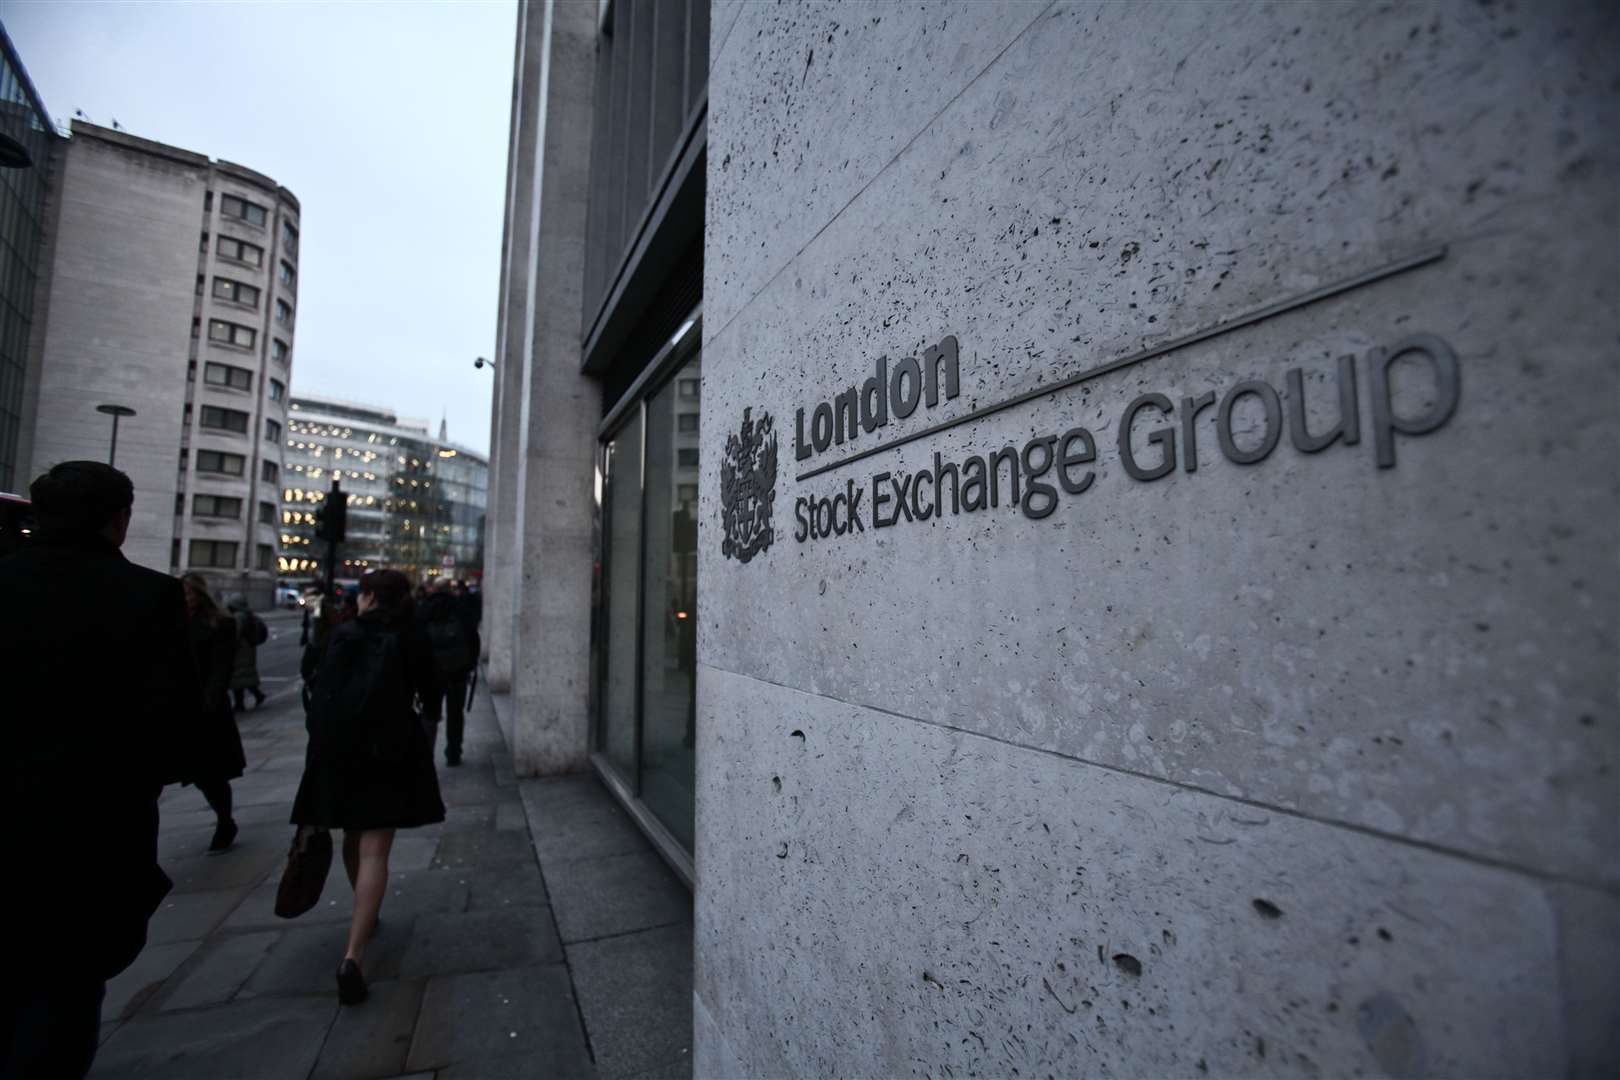 Shortly after 10am, London Stock Exchange Group (LSEG) said in a notice that trading across all its markets had resumed (Alamy/PA)